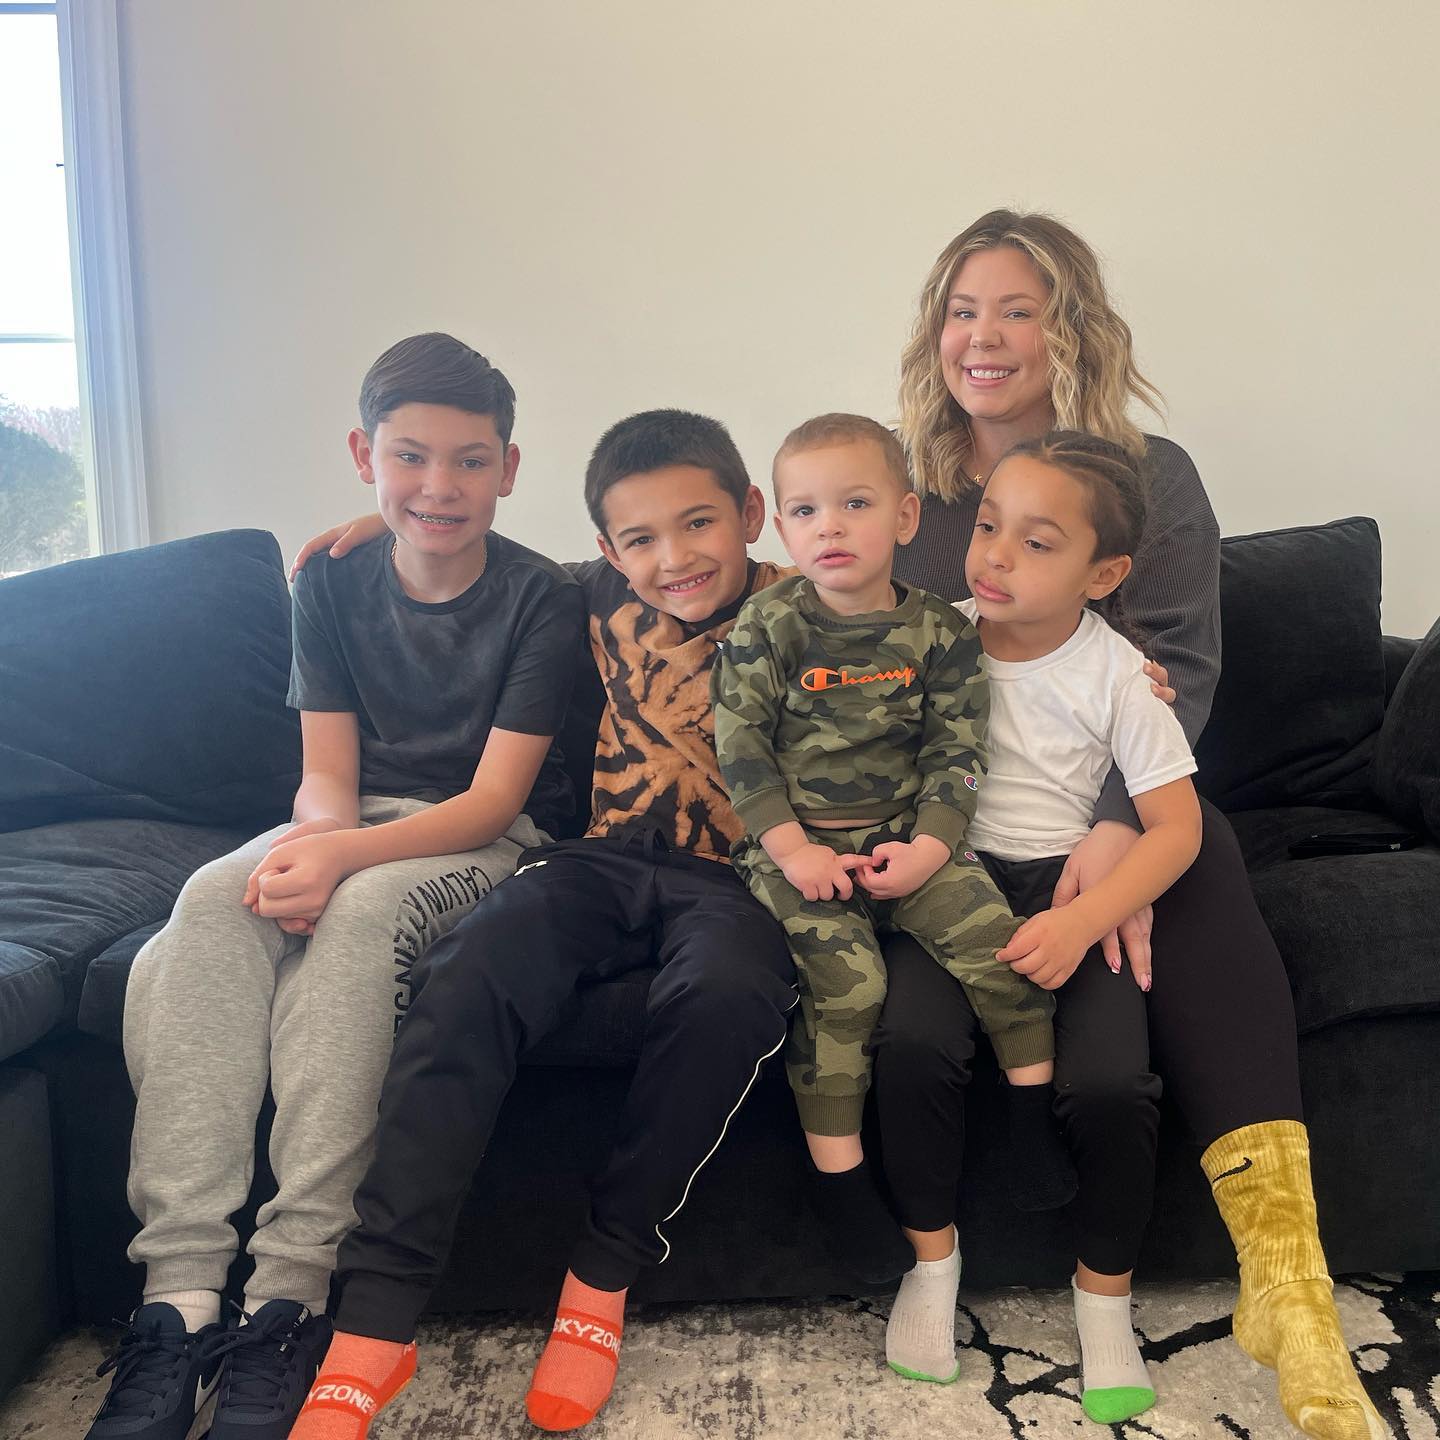 Kailyn took a group photo with four of her kids